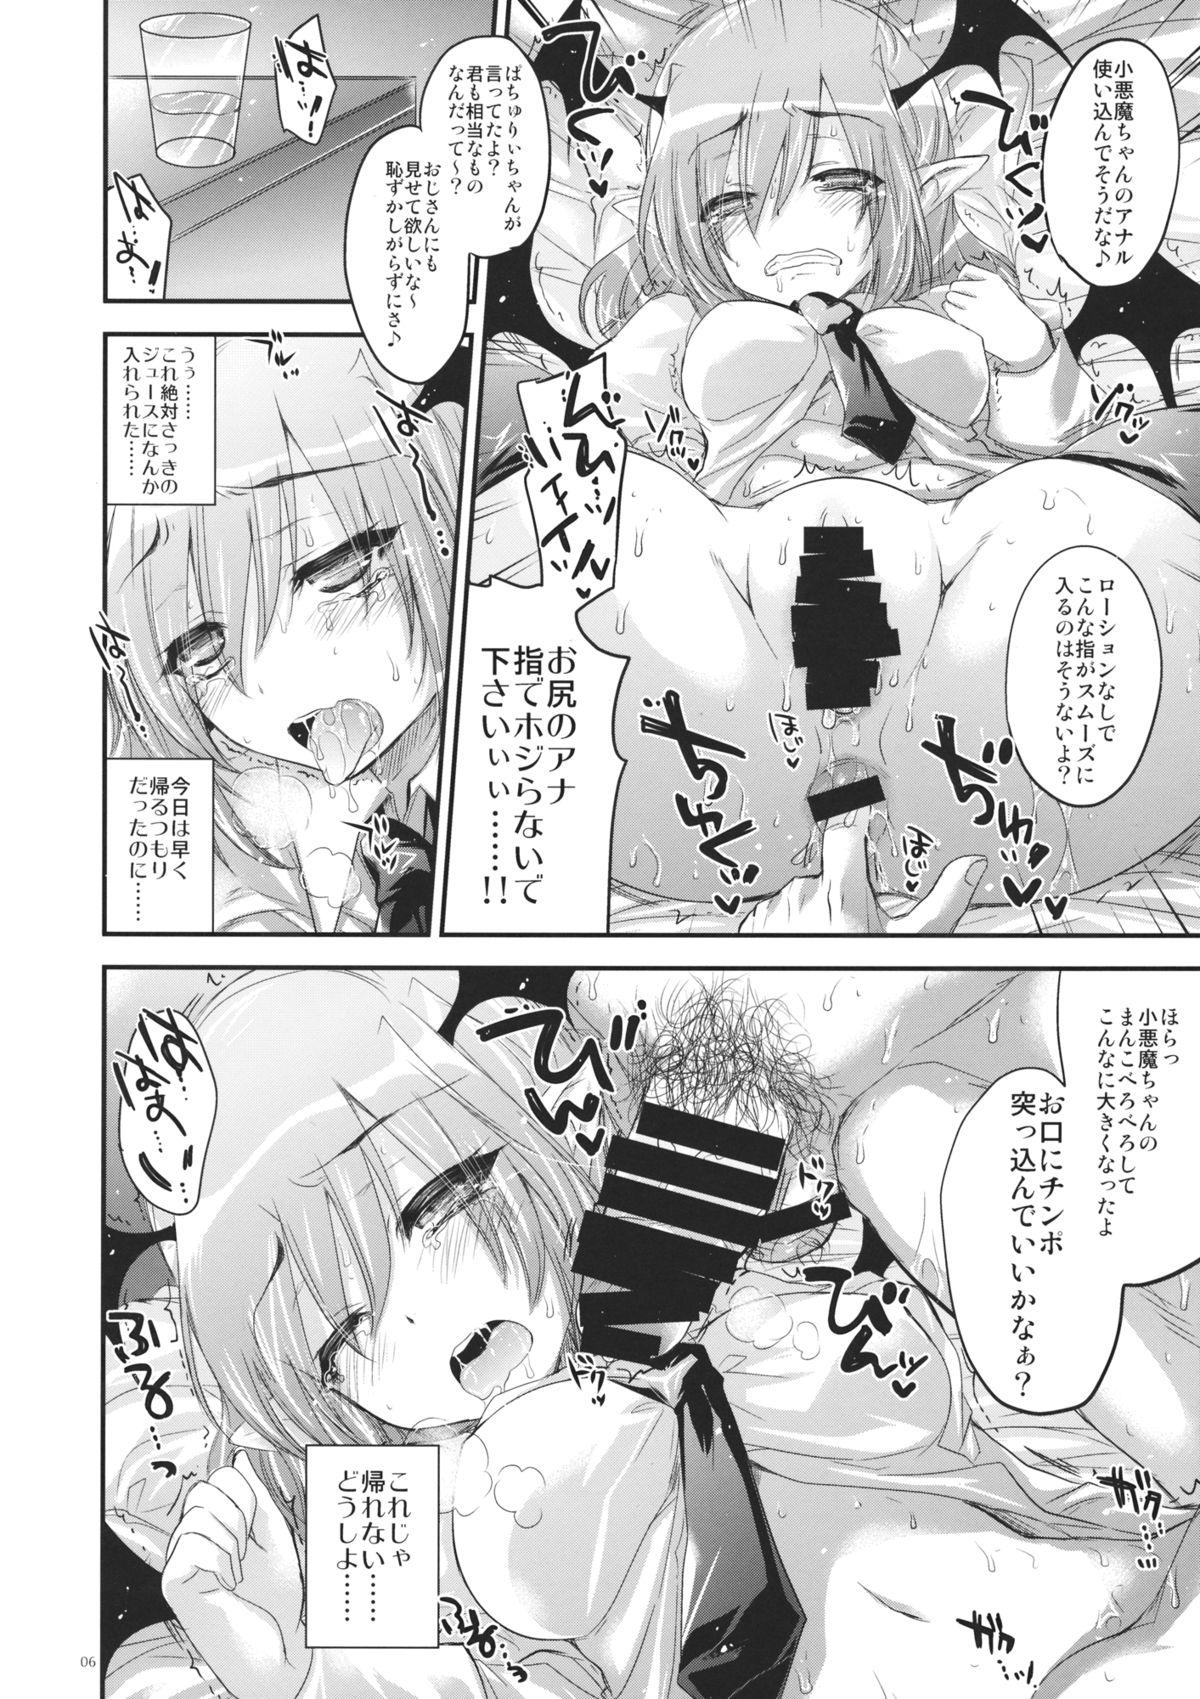 Asiansex GARIGARI 57 - Touhou project Foot - Page 5